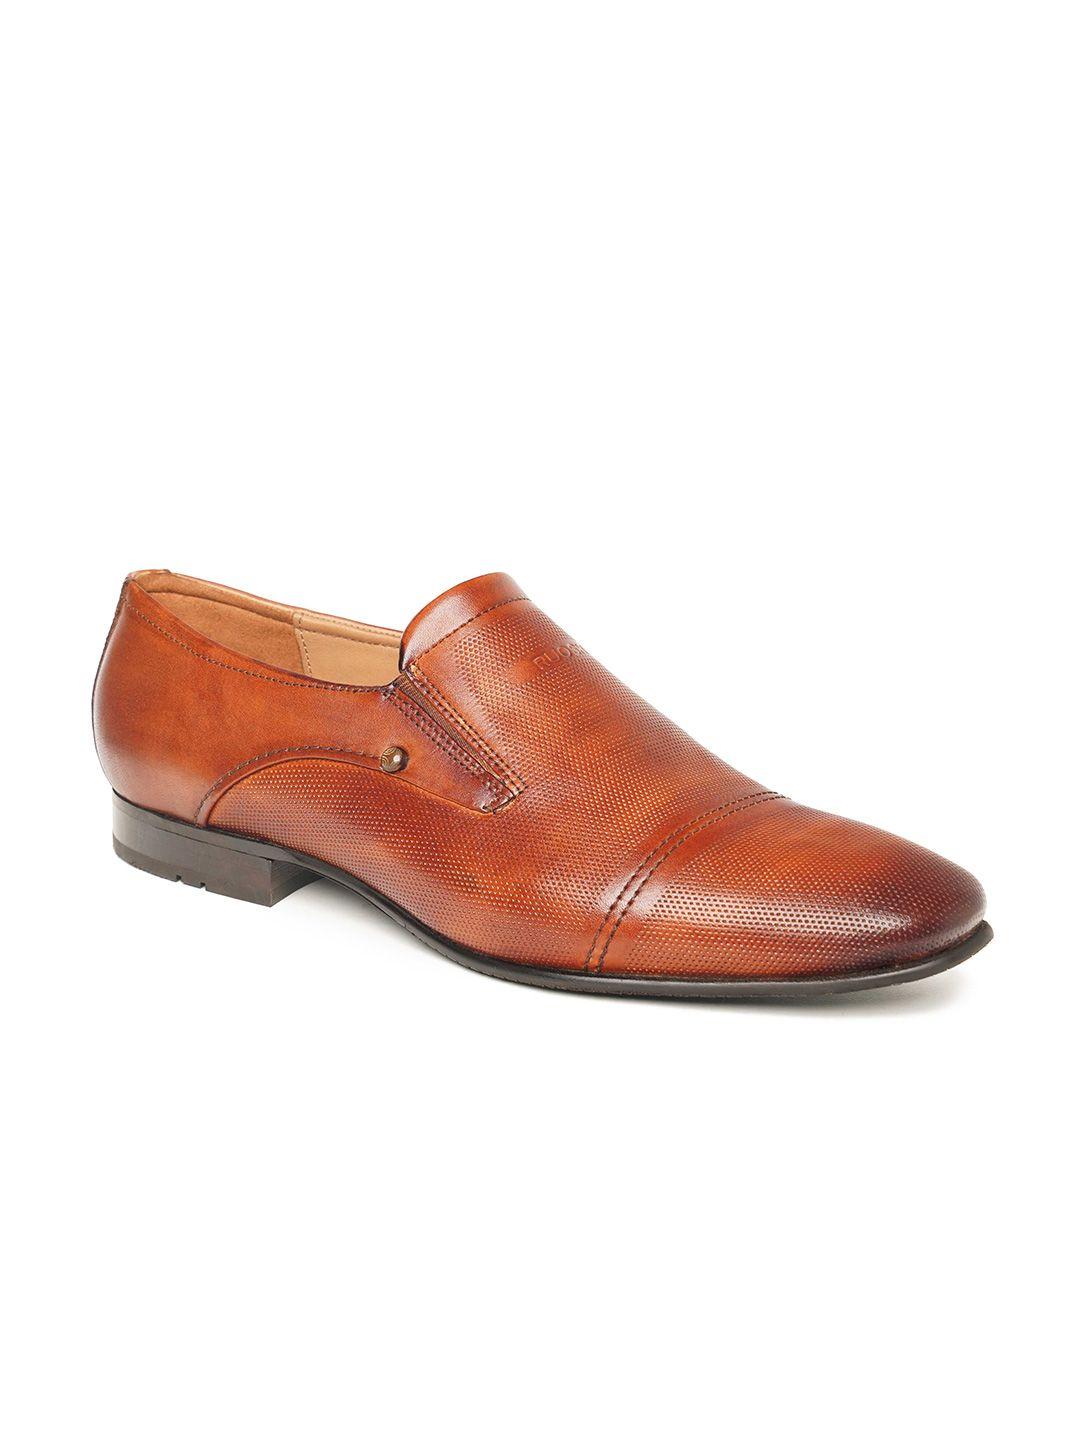 ruosh men textured leather formal loafers